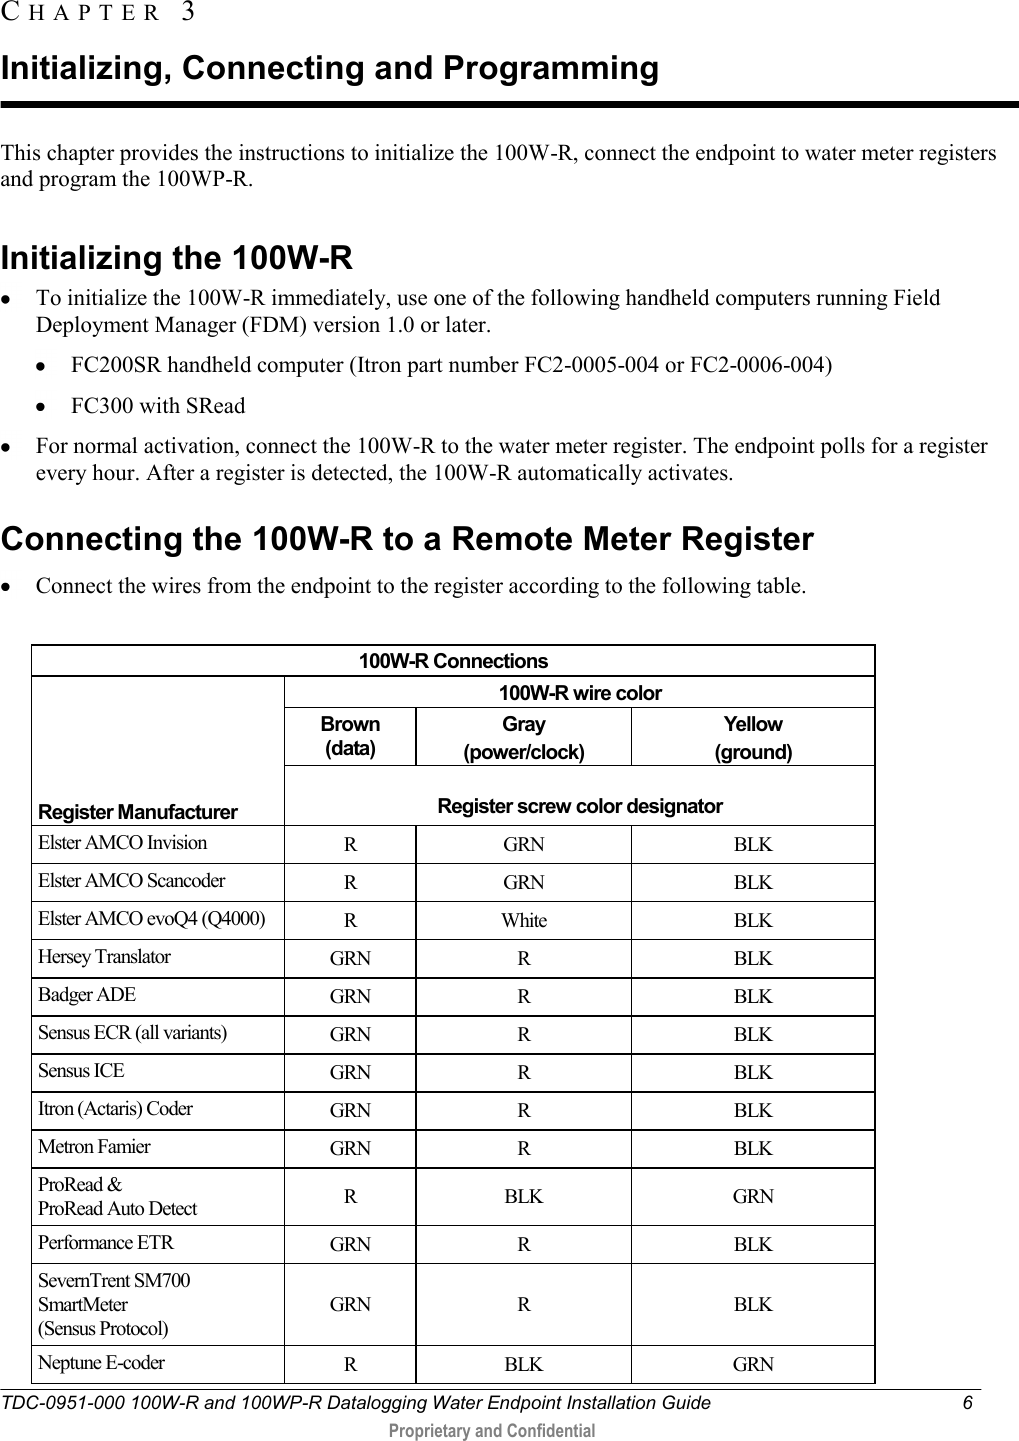  TDC-0951-000 100W-R and 100WP-R Datalogging Water Endpoint Installation Guide  6   Proprietary and Confidential     This chapter provides the instructions to initialize the 100W-R, connect the endpoint to water meter registers and program the 100WP-R.   Initializing the 100W-R  To initialize the 100W-R immediately, use one of the following handheld computers running Field Deployment Manager (FDM) version 1.0 or later.   FC200SR handheld computer (Itron part number FC2-0005-004 or FC2-0006-004)  FC300 with SRead  For normal activation, connect the 100W-R to the water meter register. The endpoint polls for a register every hour. After a register is detected, the 100W-R automatically activates.   Connecting the 100W-R to a Remote Meter Register    Connect the wires from the endpoint to the register according to the following table.  100W-R Connections      Register Manufacturer 100W-R wire color Brown  (data) Gray  (power/clock) Yellow (ground)  Register screw color designator Elster AMCO Invision R GRN BLK Elster AMCO Scancoder R GRN BLK Elster AMCO evoQ4 (Q4000) R White BLK Hersey Translator GRN R BLK Badger ADE GRN R BLK Sensus ECR (all variants) GRN R BLK Sensus ICE GRN R BLK Itron (Actaris) Coder GRN R BLK Metron Famier GRN R BLK ProRead &amp;  ProRead Auto Detect R BLK GRN Performance ETR GRN R BLK SevernTrent SM700 SmartMeter  (Sensus Protocol) GRN R BLK Neptune E-coder R BLK GRN CH A P T E R   3  Initializing, Connecting and Programming  